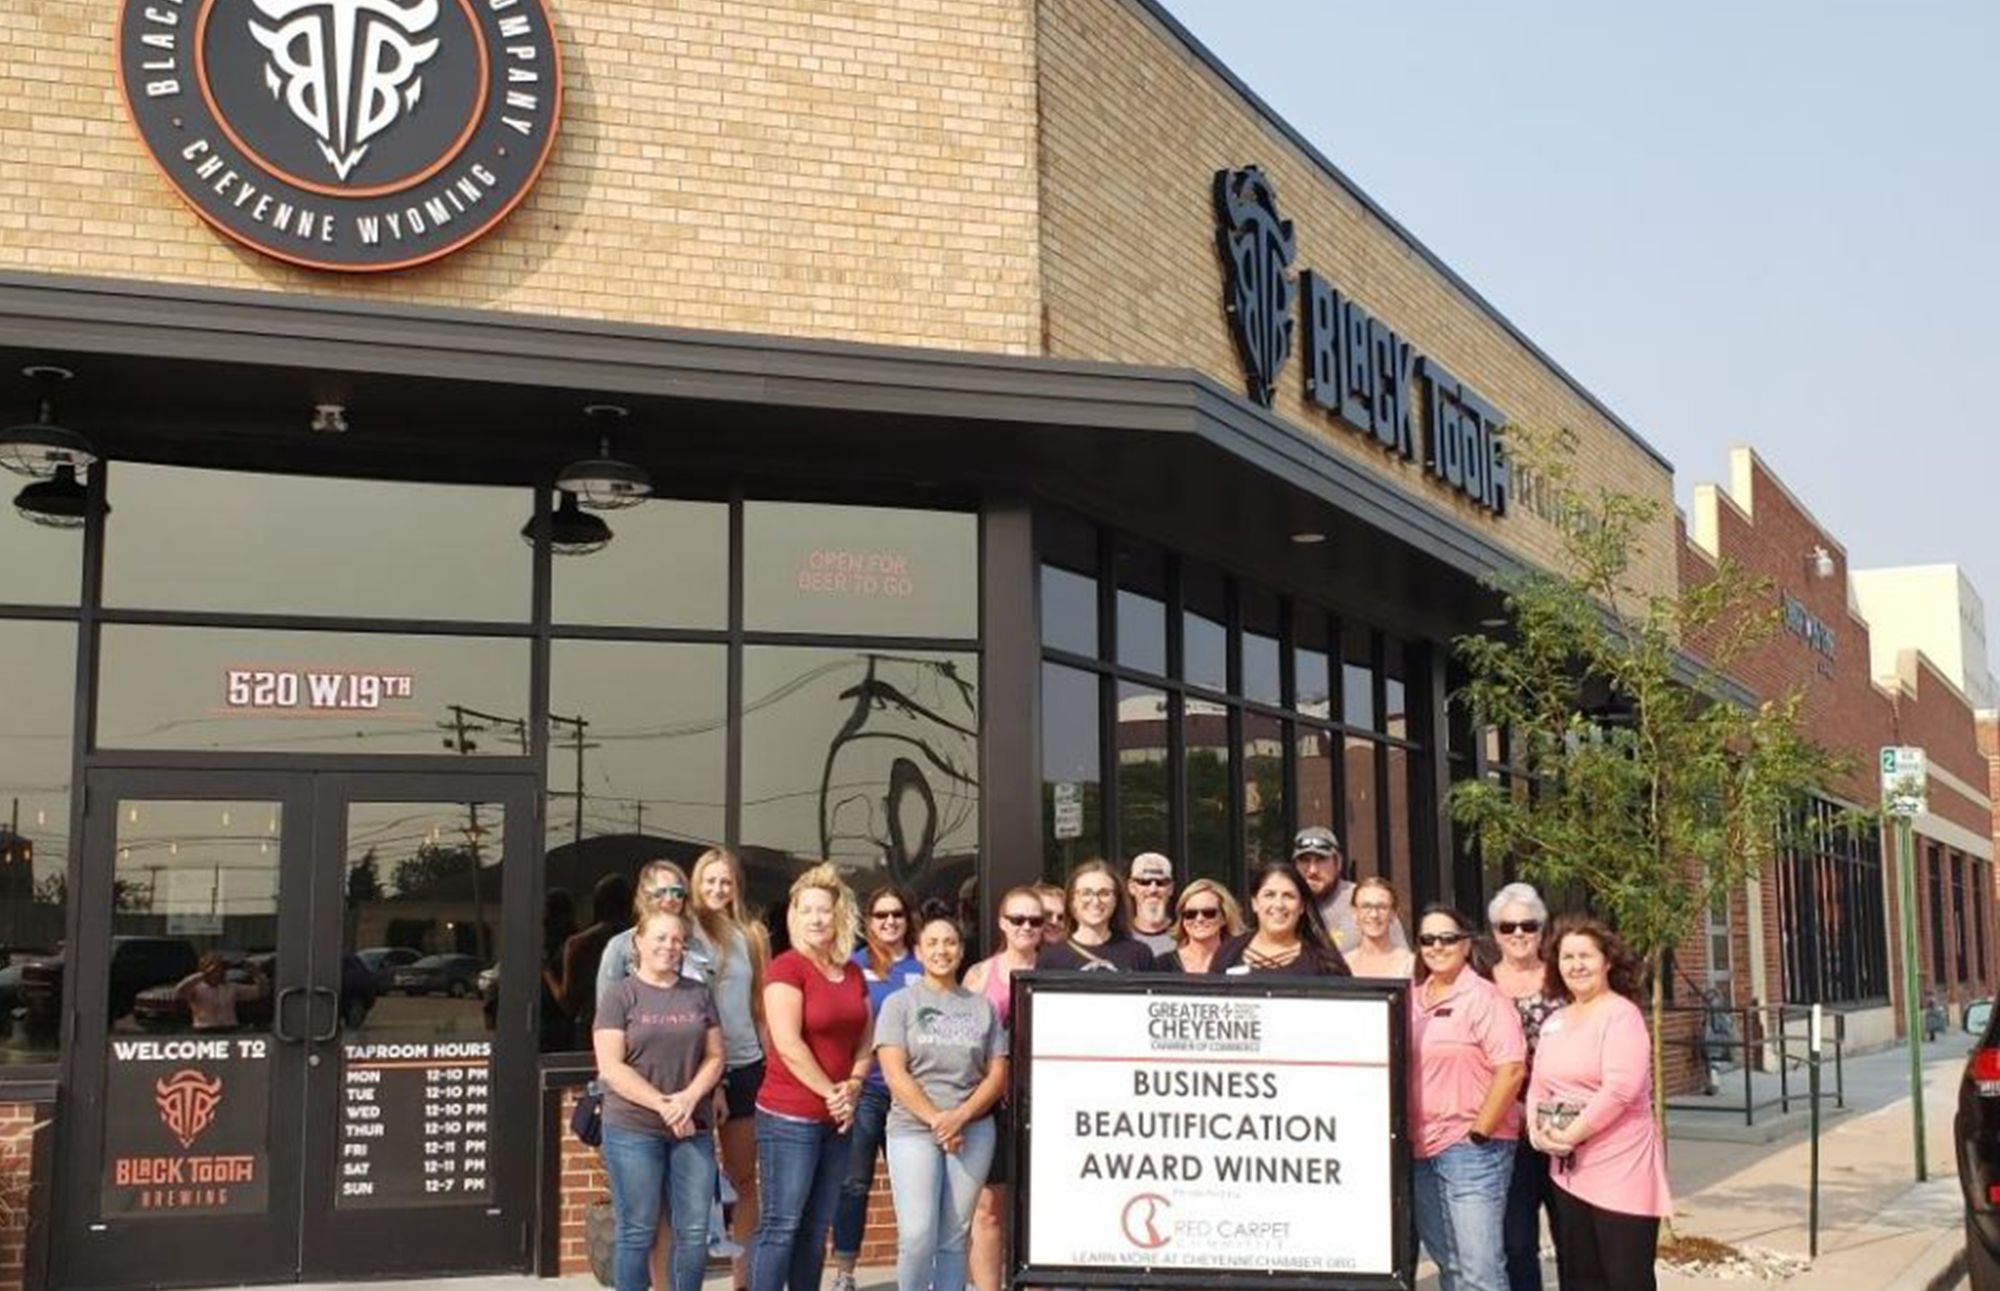 Black Tooth Brewing Honored with Beautification Award